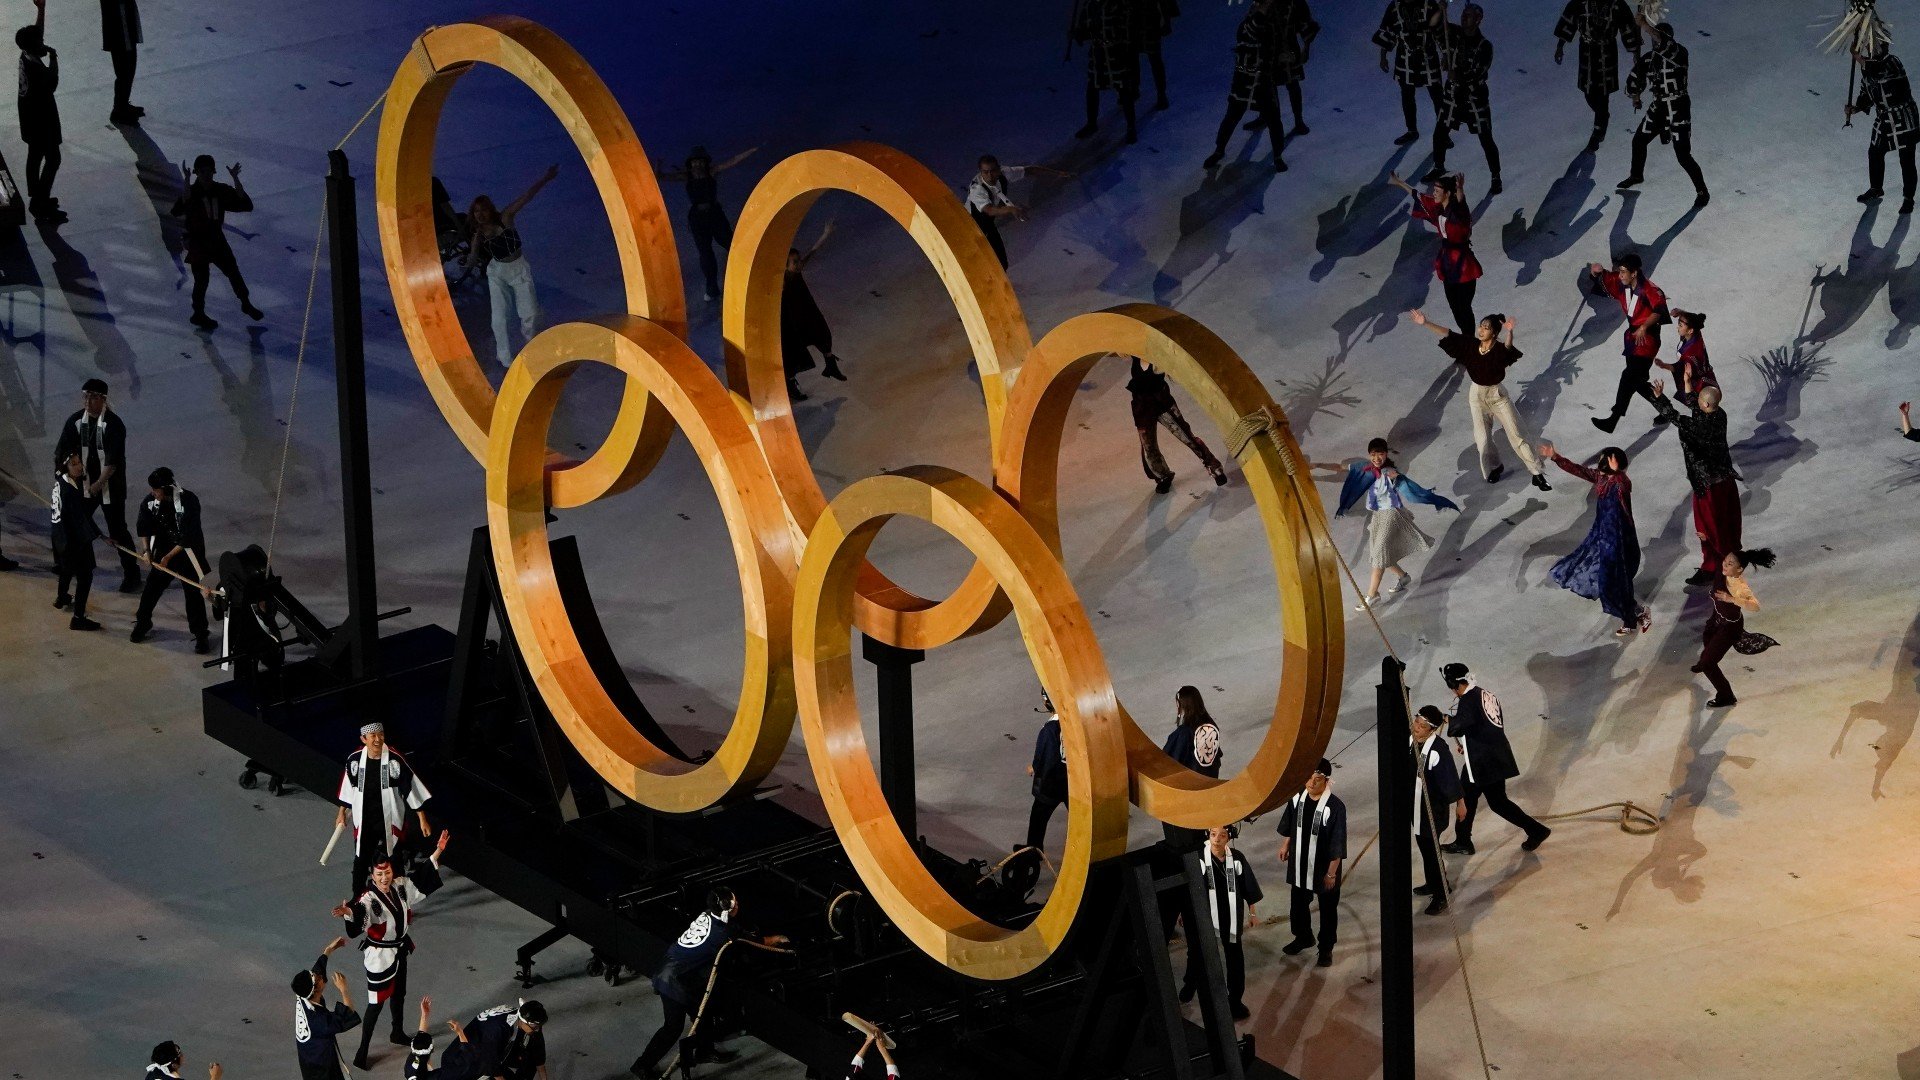 Olympics rings malfunction at Sochi 2014 opening ceremony | The Independent  | The Independent